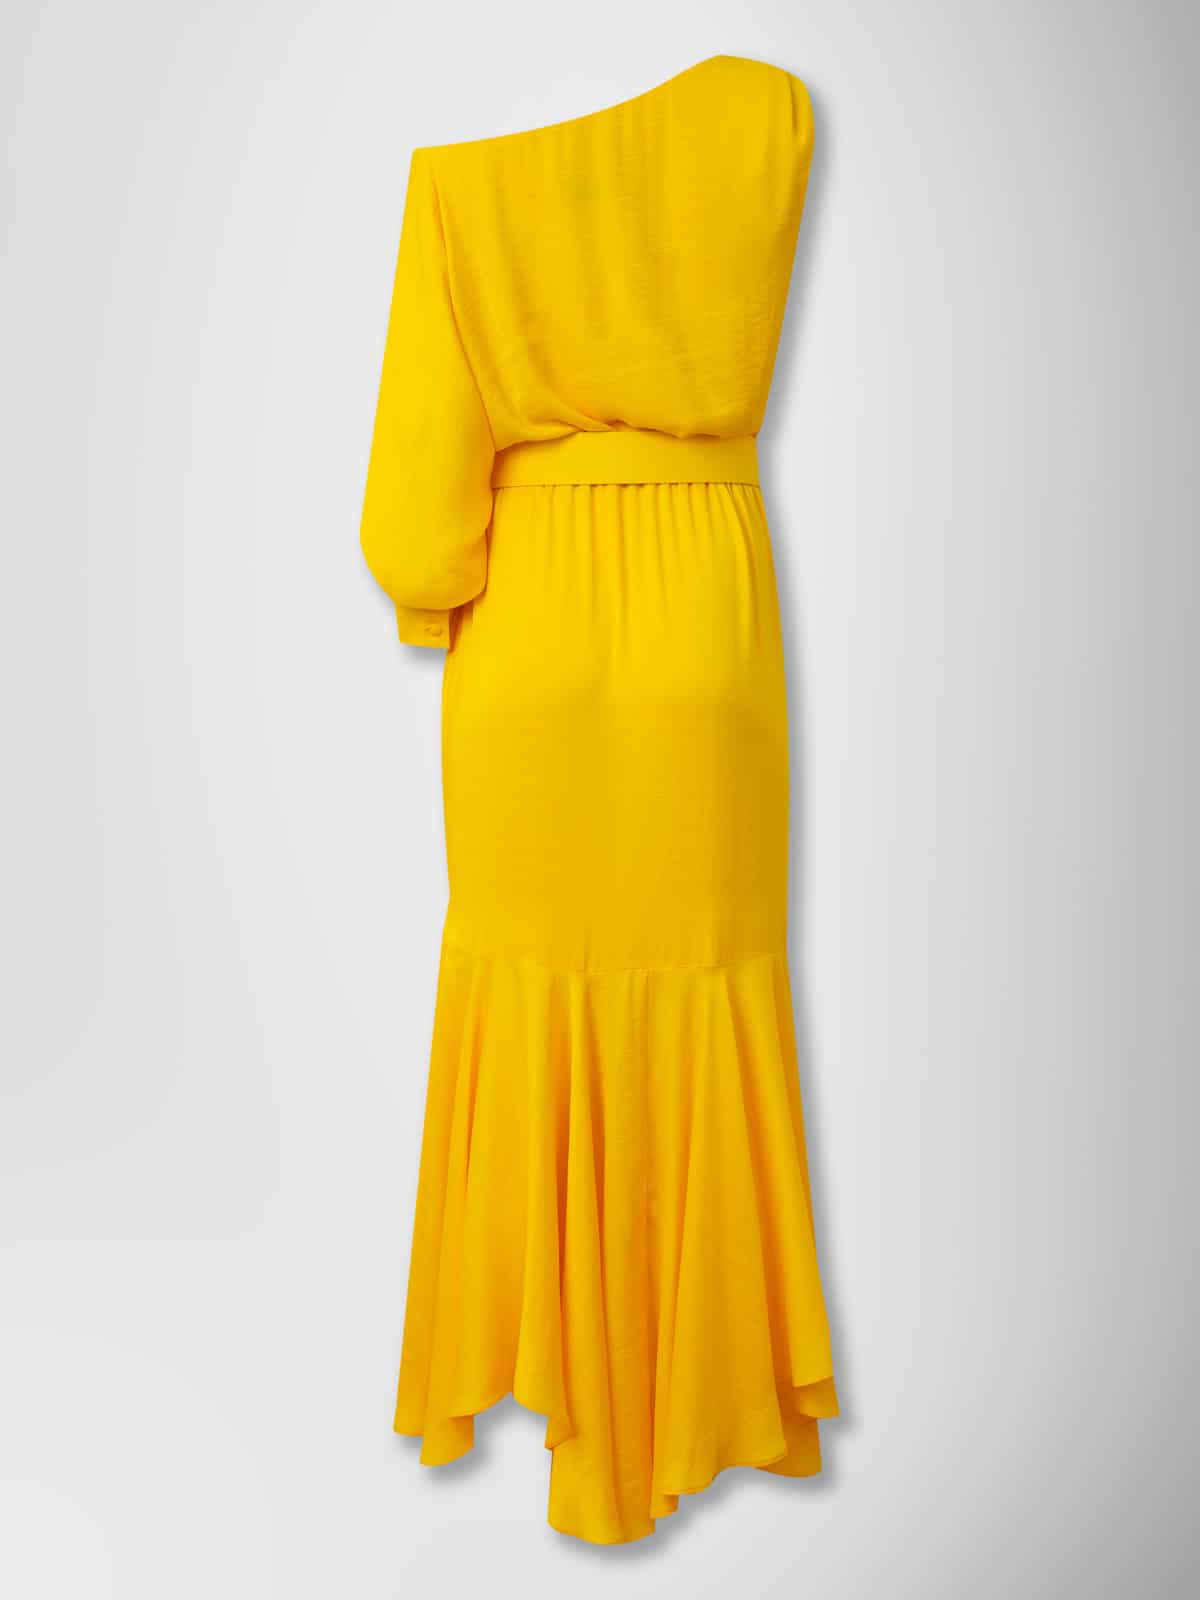 ONE SHOULDER DRESS YELLOW